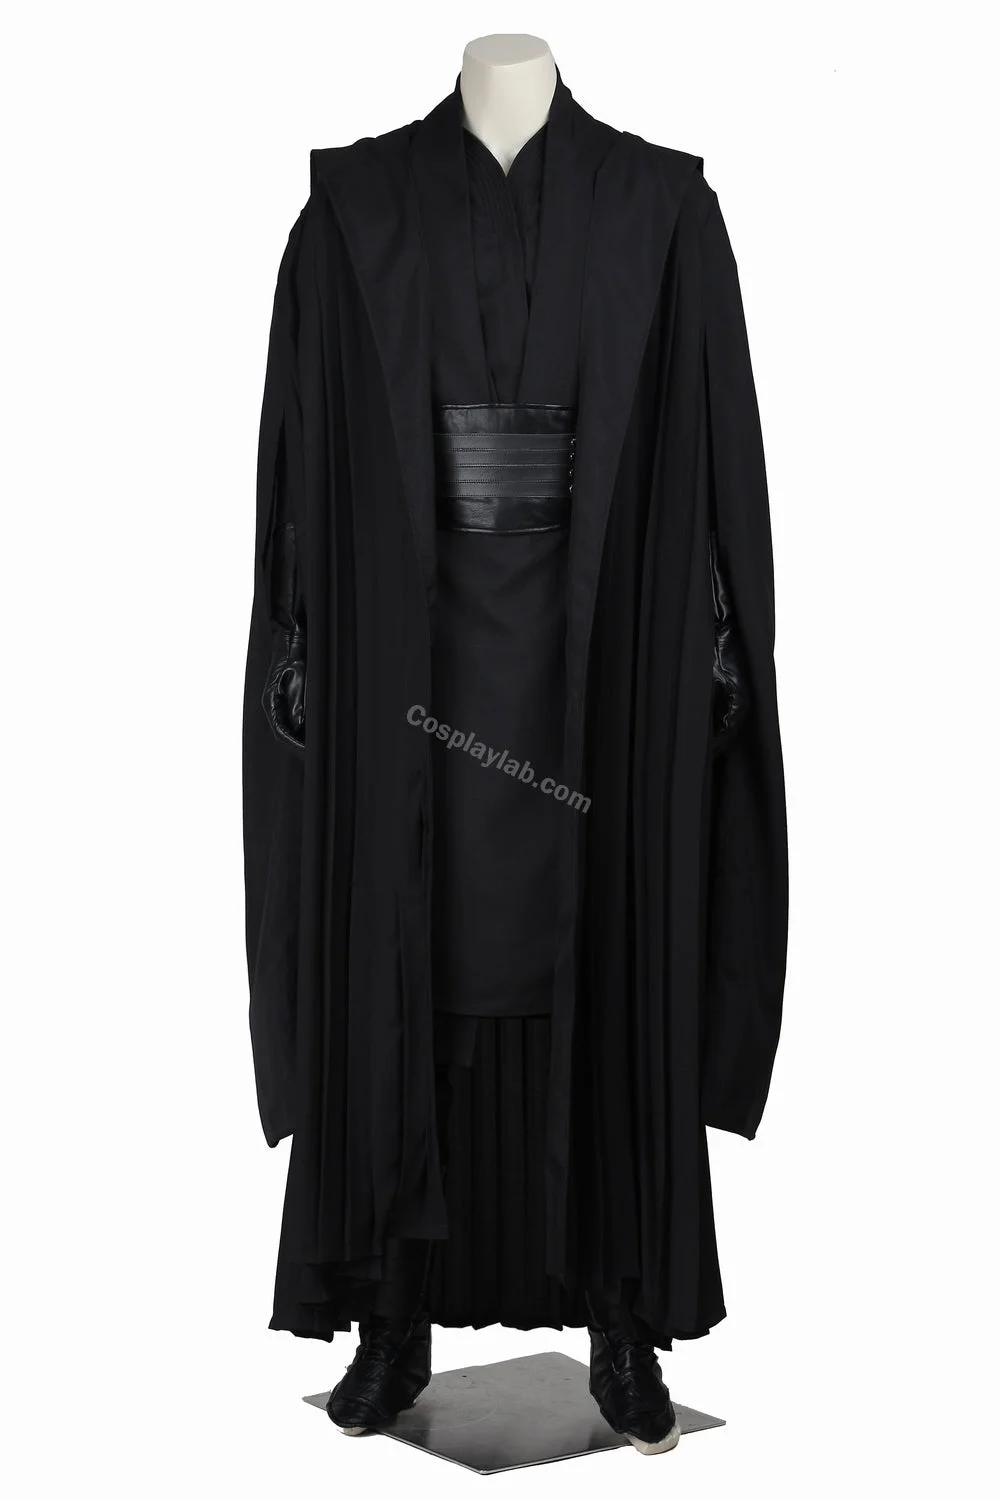 Darth Maul halloween adults Costume Sith Lord Classic Cosplay Suit By CosplayLab